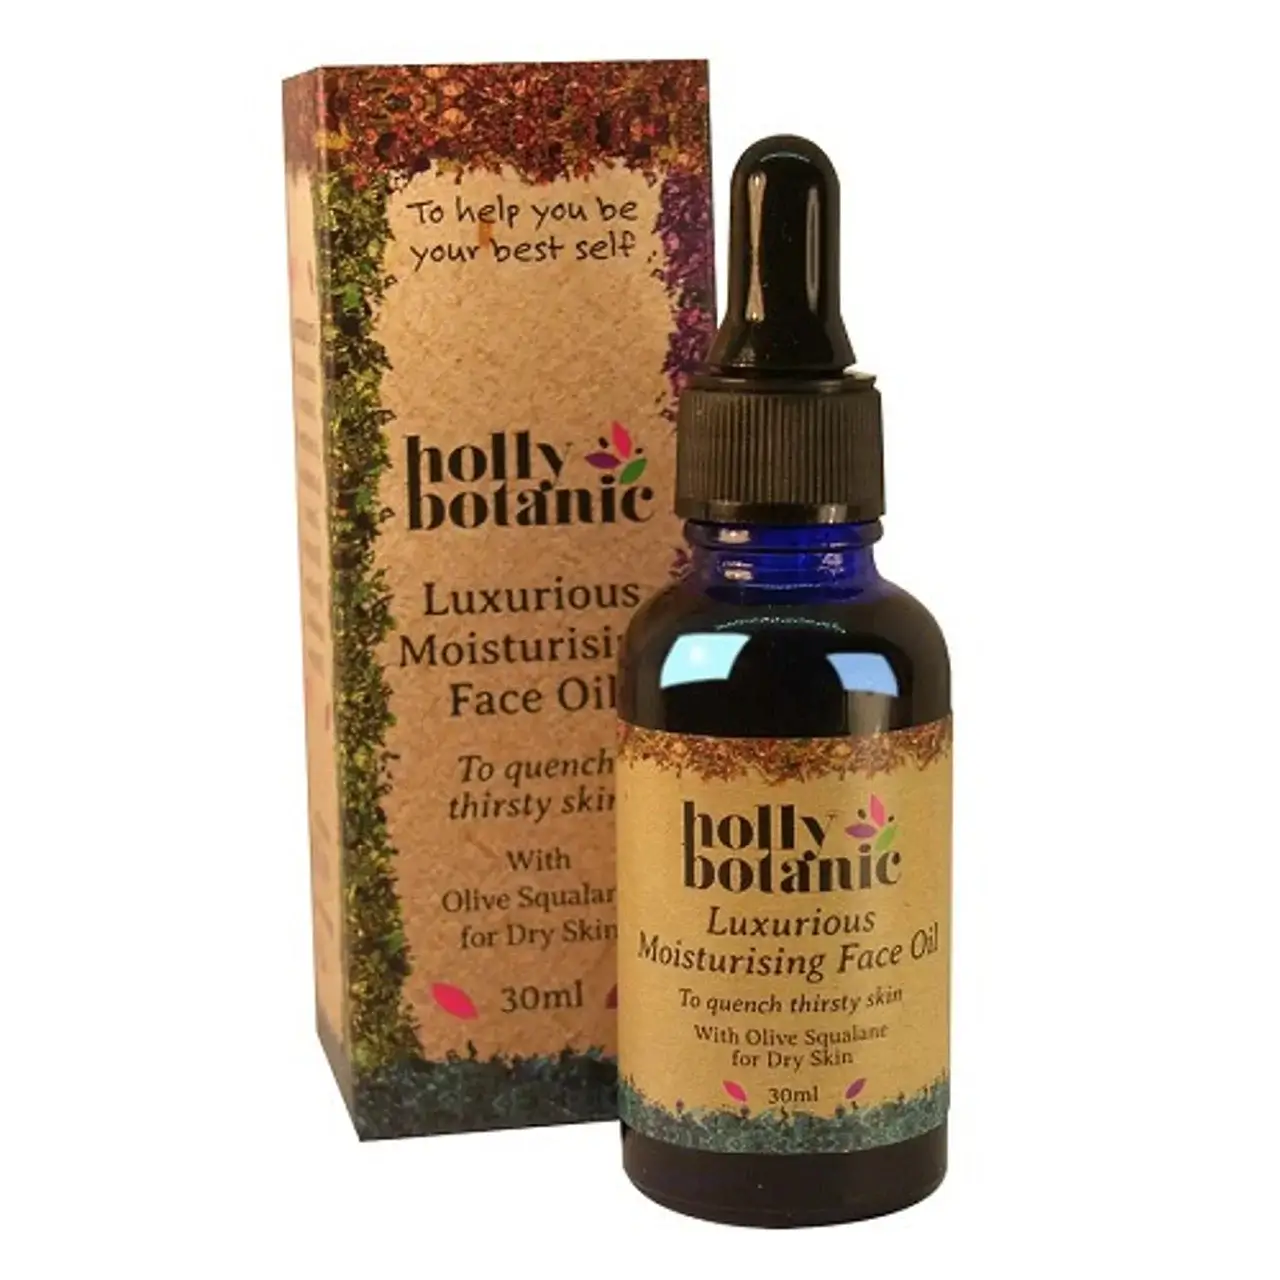 Holly Botanic moisturising face oil bottle and box. 30ml glass bottle with pipette and box.